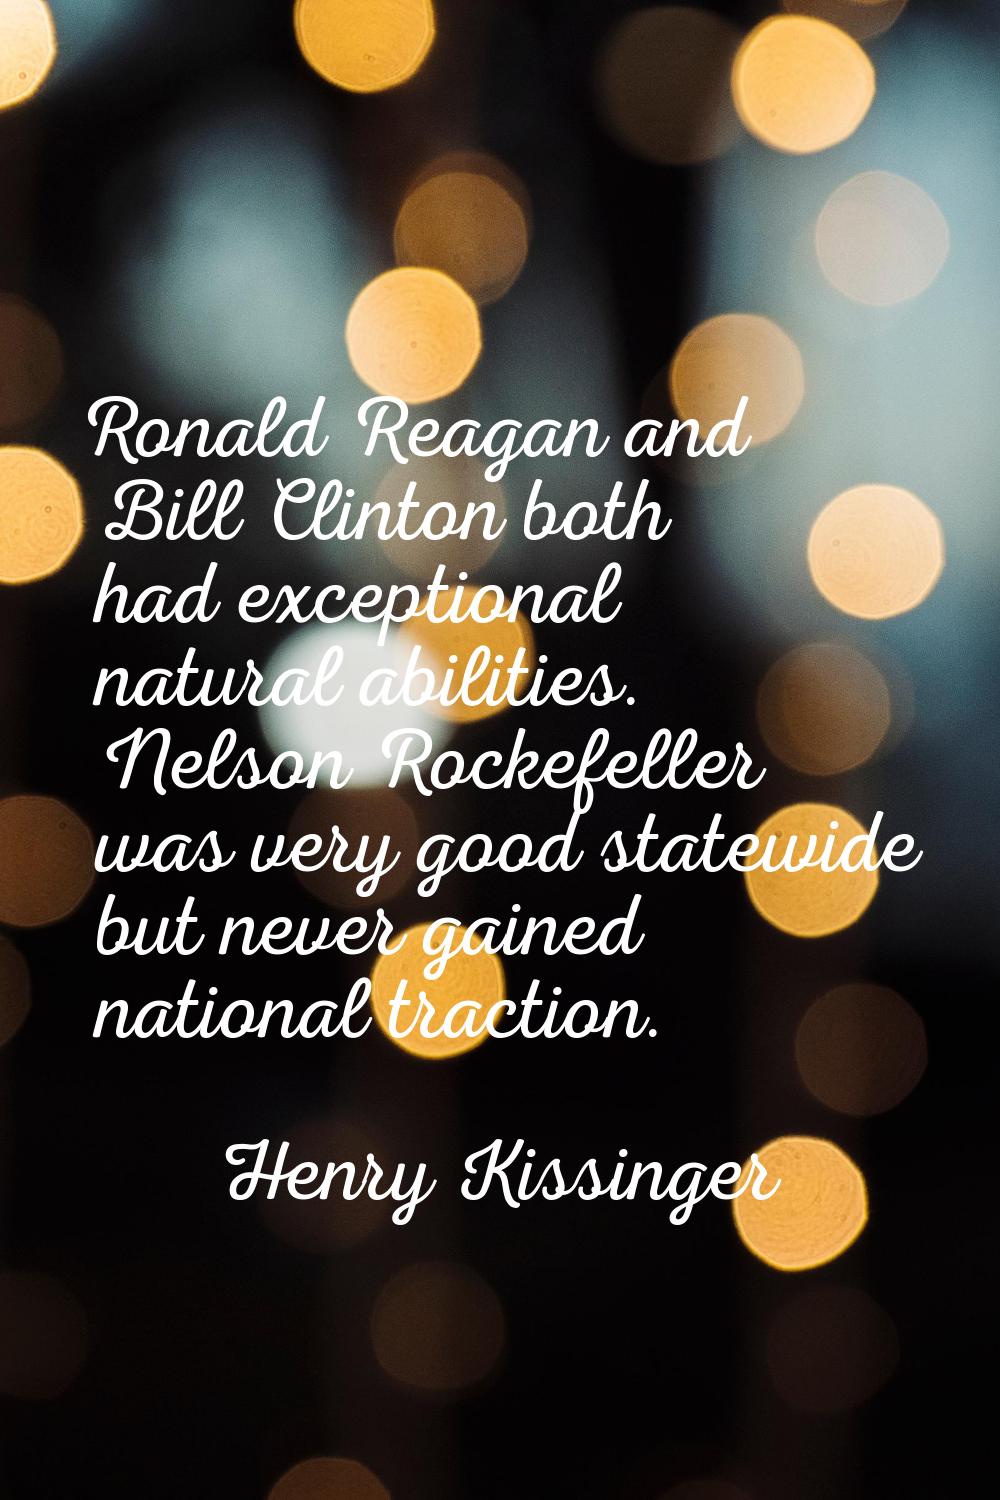 Ronald Reagan and Bill Clinton both had exceptional natural abilities. Nelson Rockefeller was very 